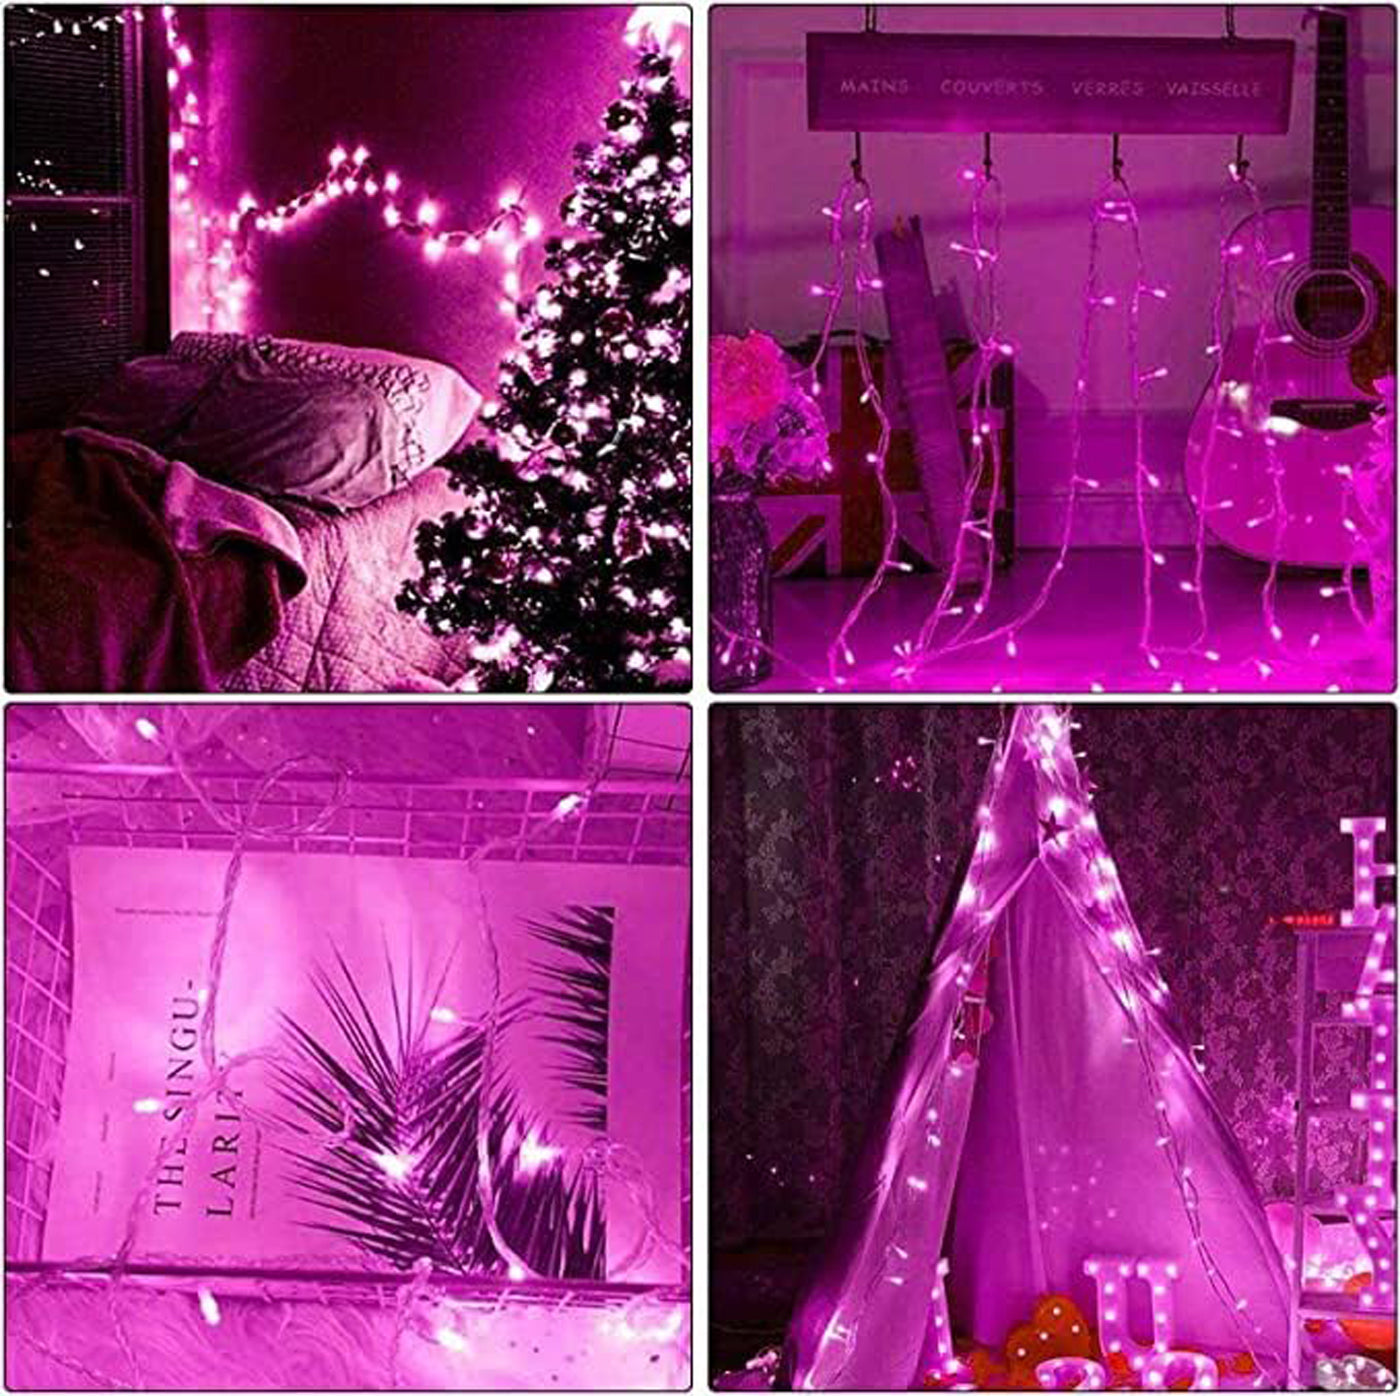 DecorTwist LED String Light for Home and Office Decor | Indoor & Outdoor Decorative Lights | Christmas | Diwali | Wedding | 15 Meter Length (Pink)